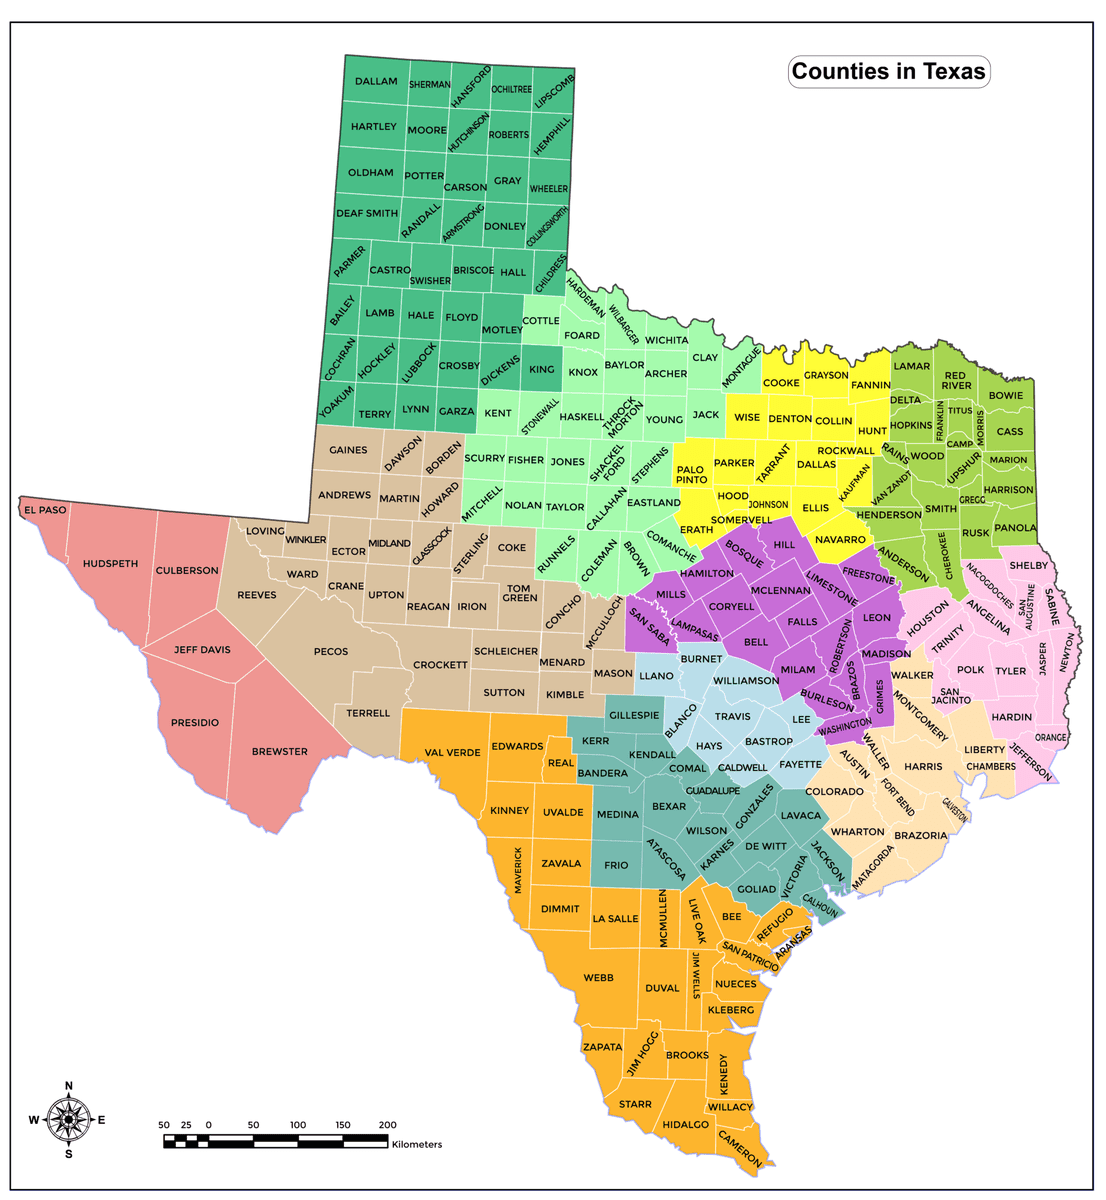 Texas Counties Map - California Places, Travel, and News.